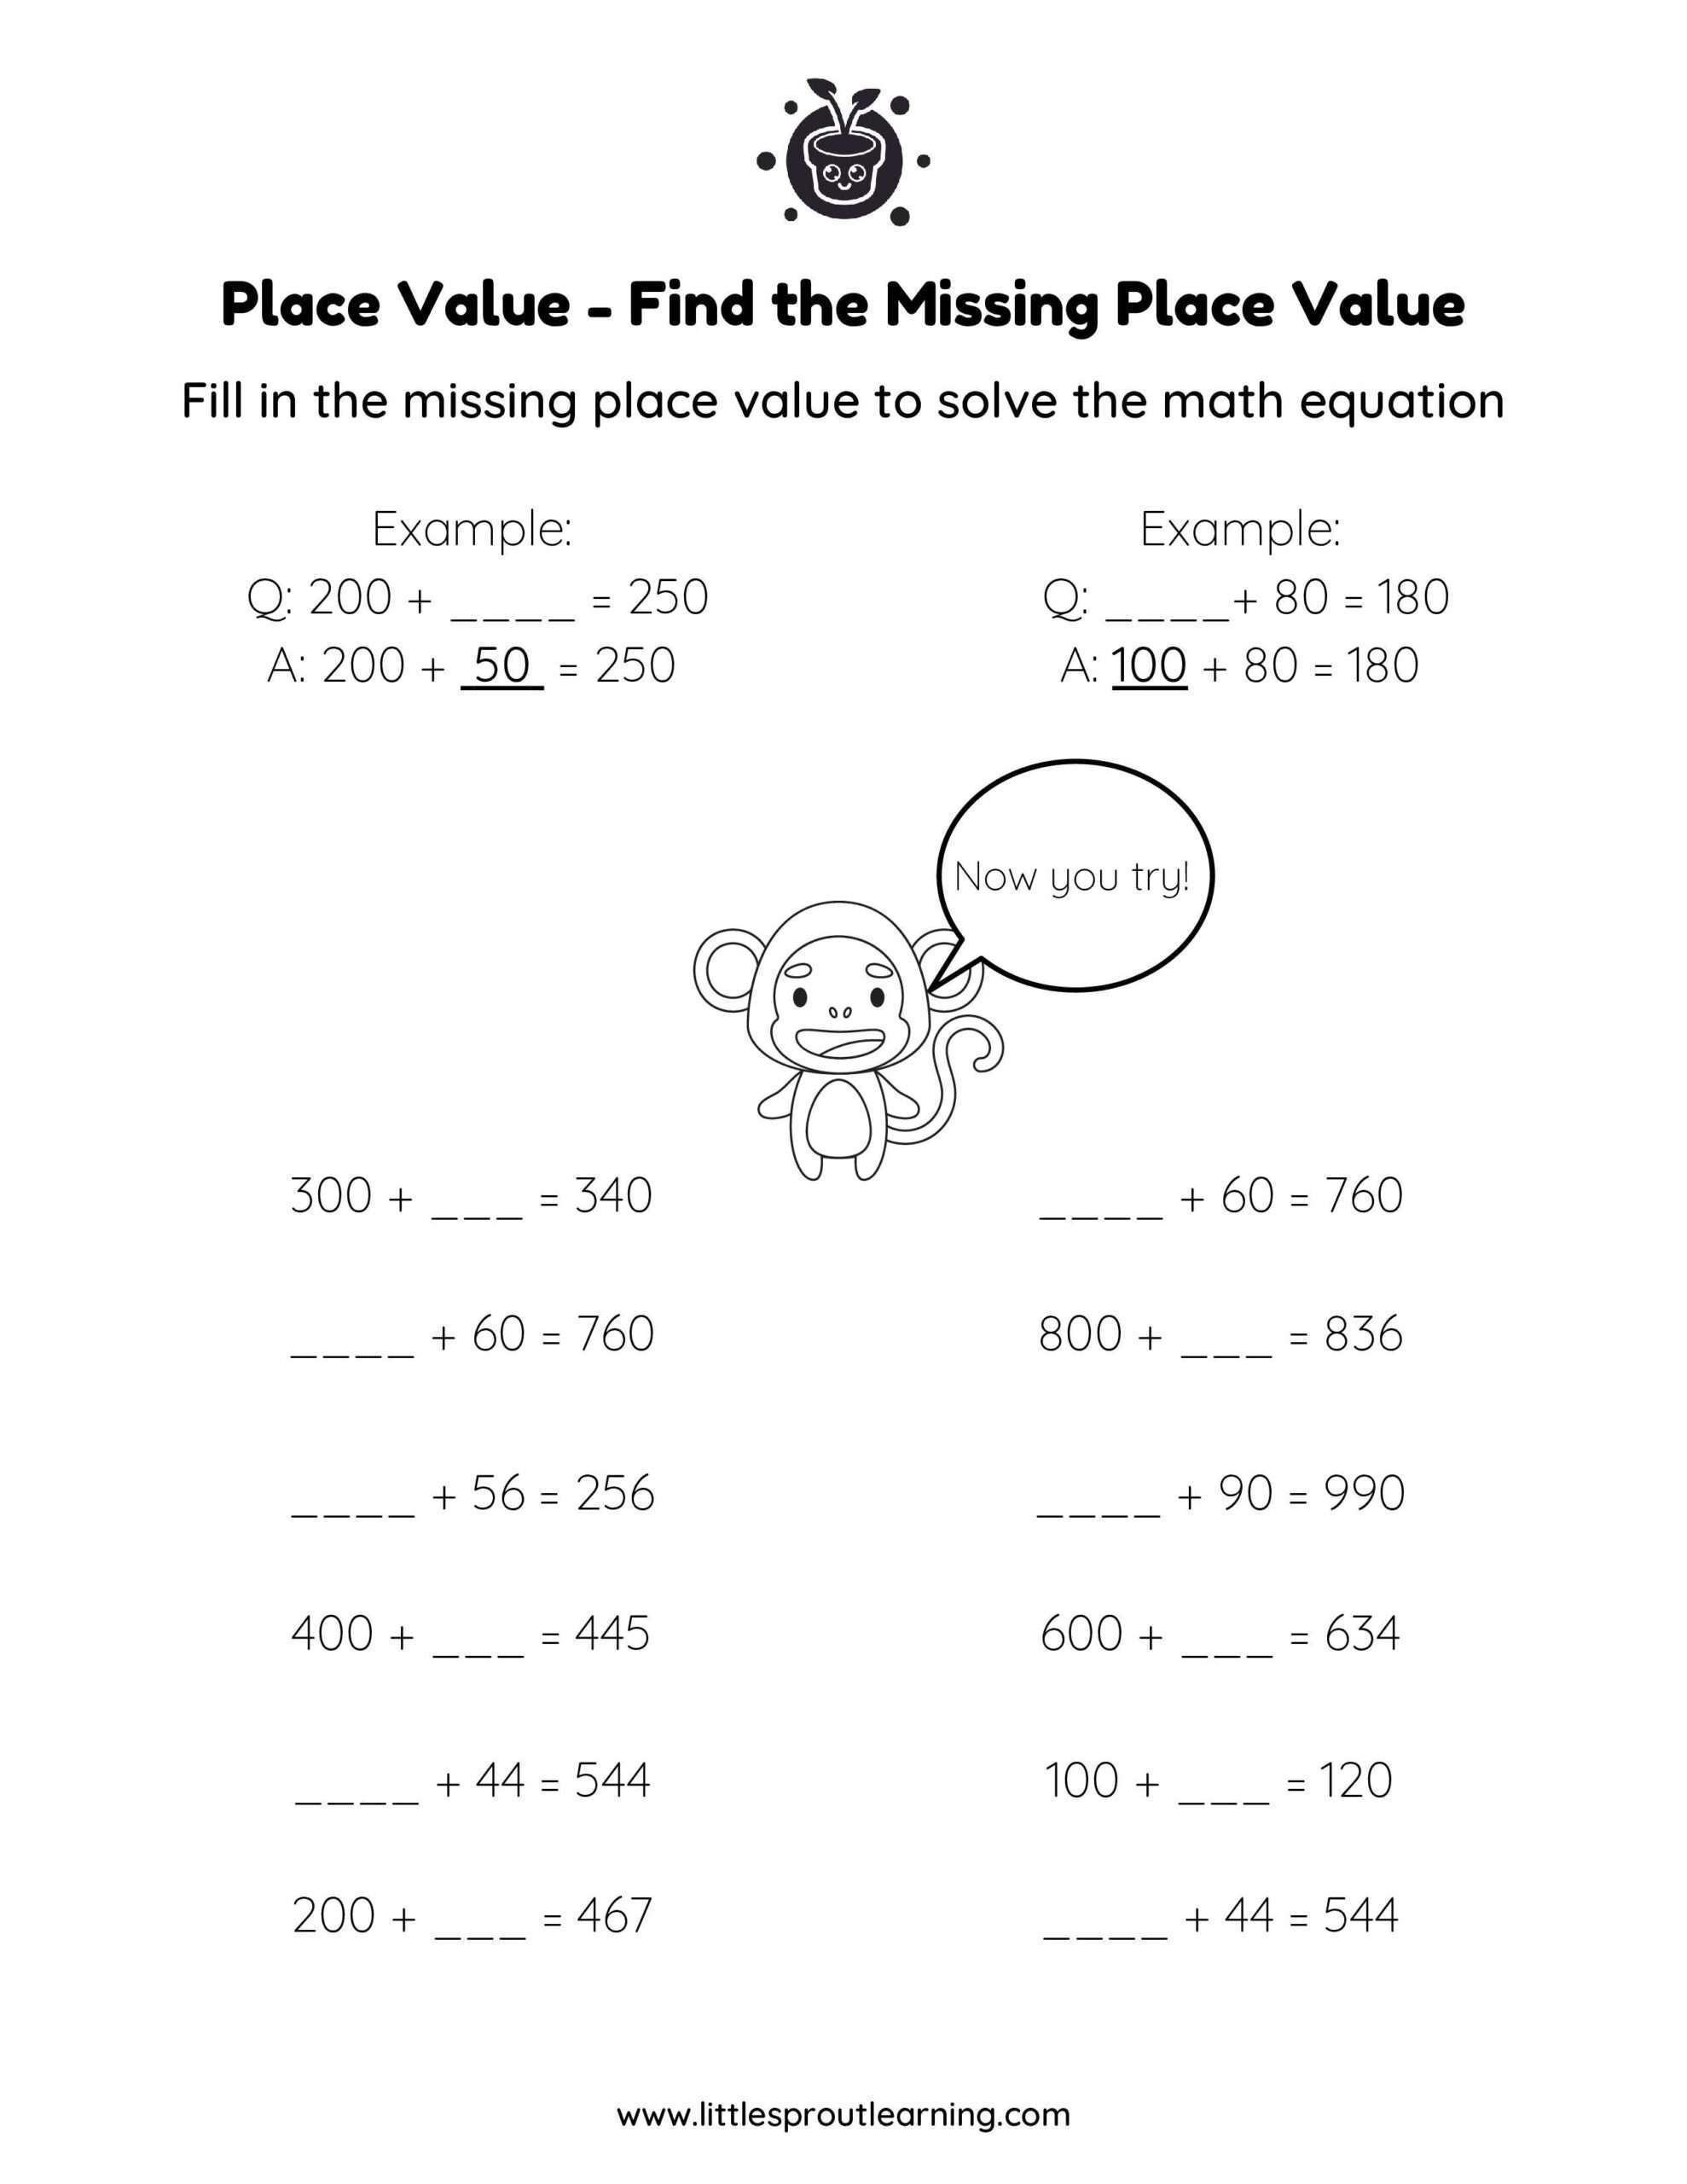 Find the Missing Place Value